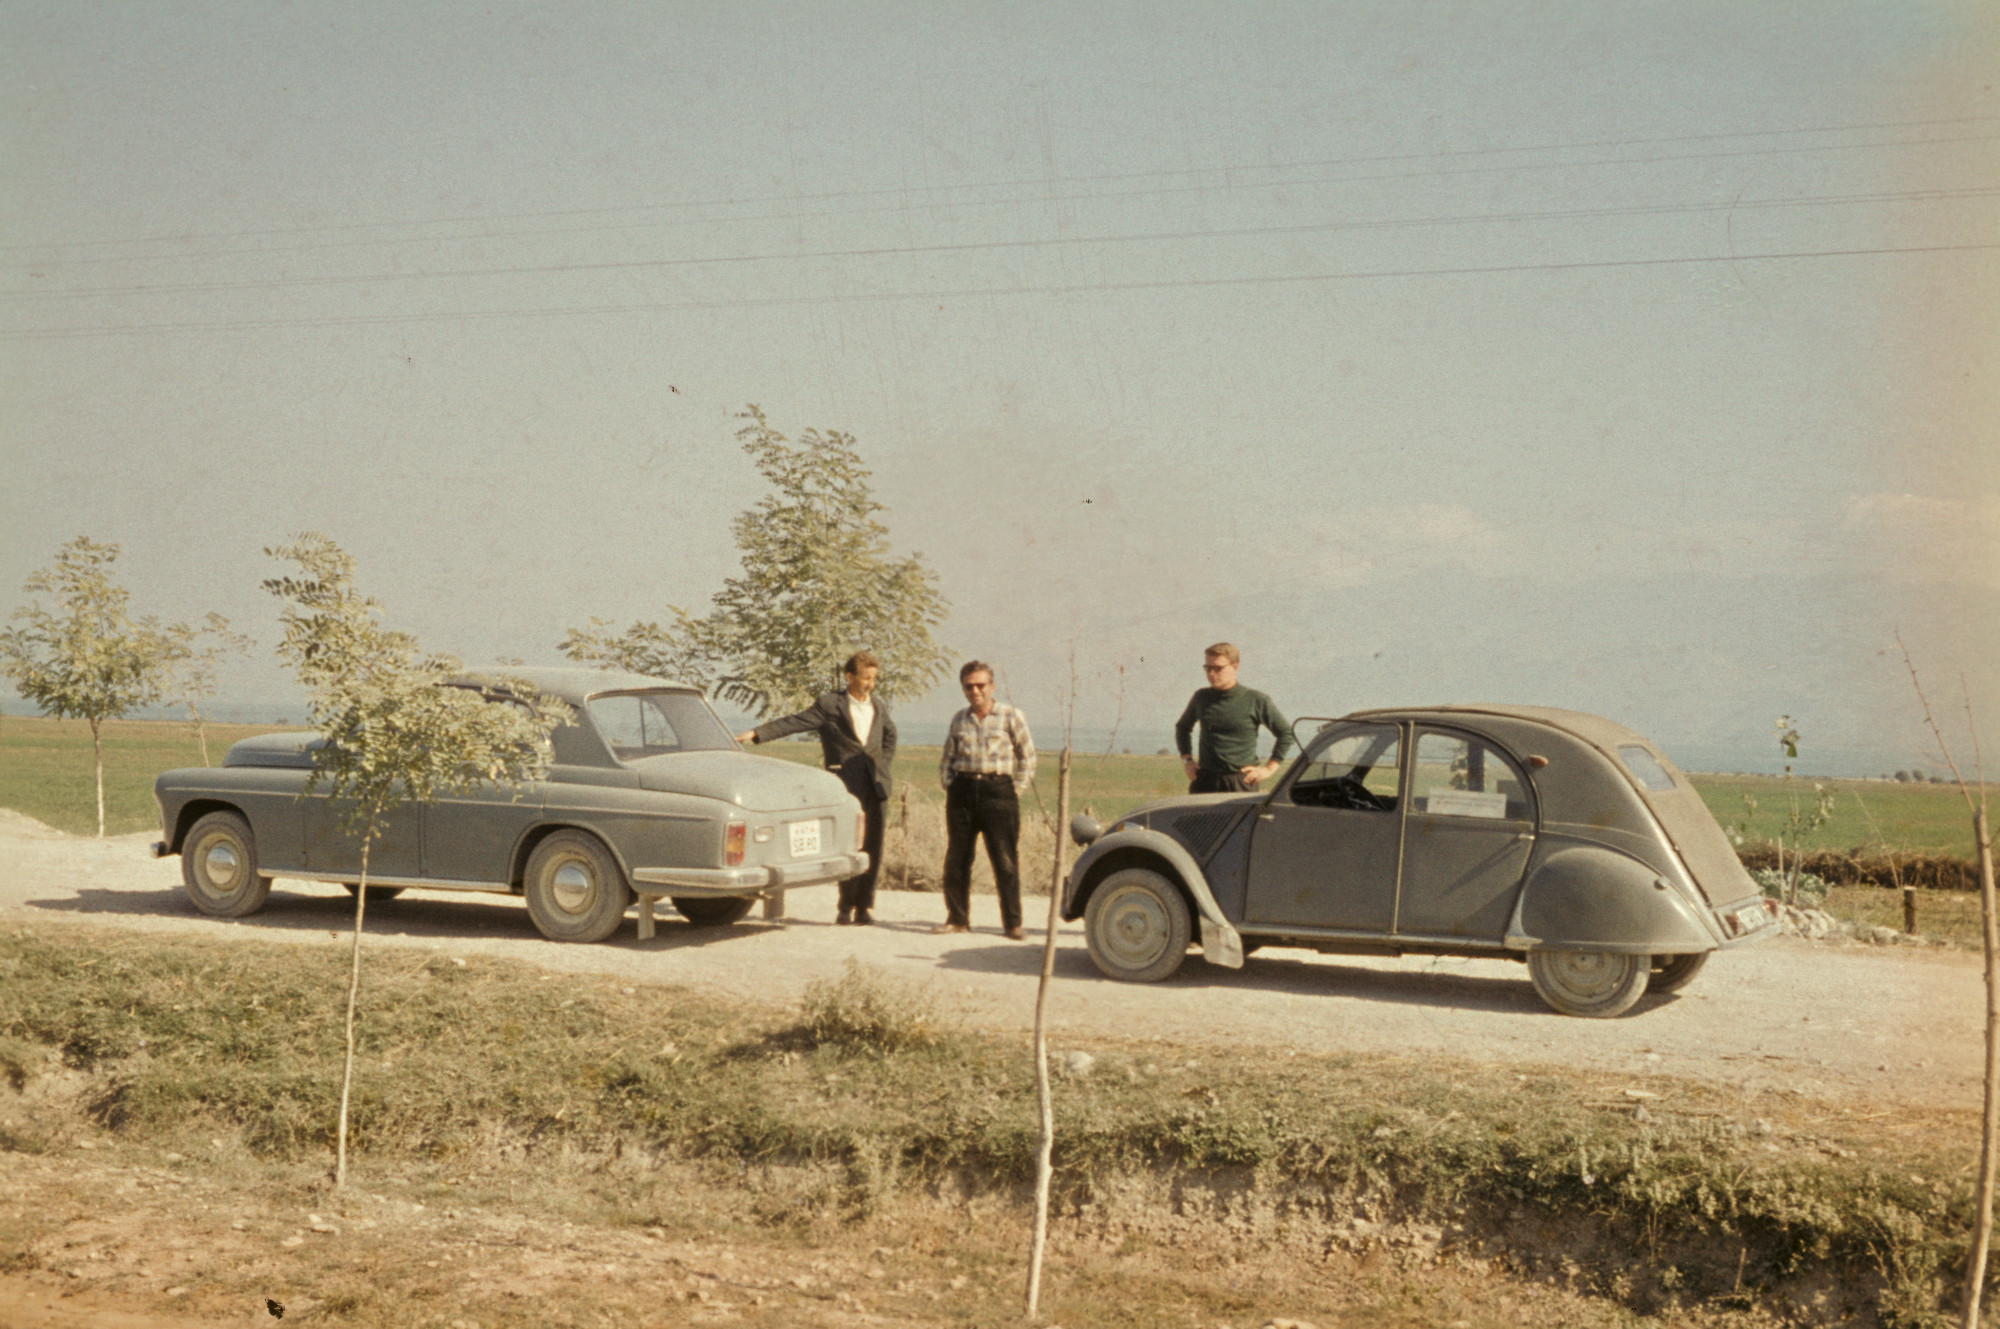 Travelling in Albania in the 1960s